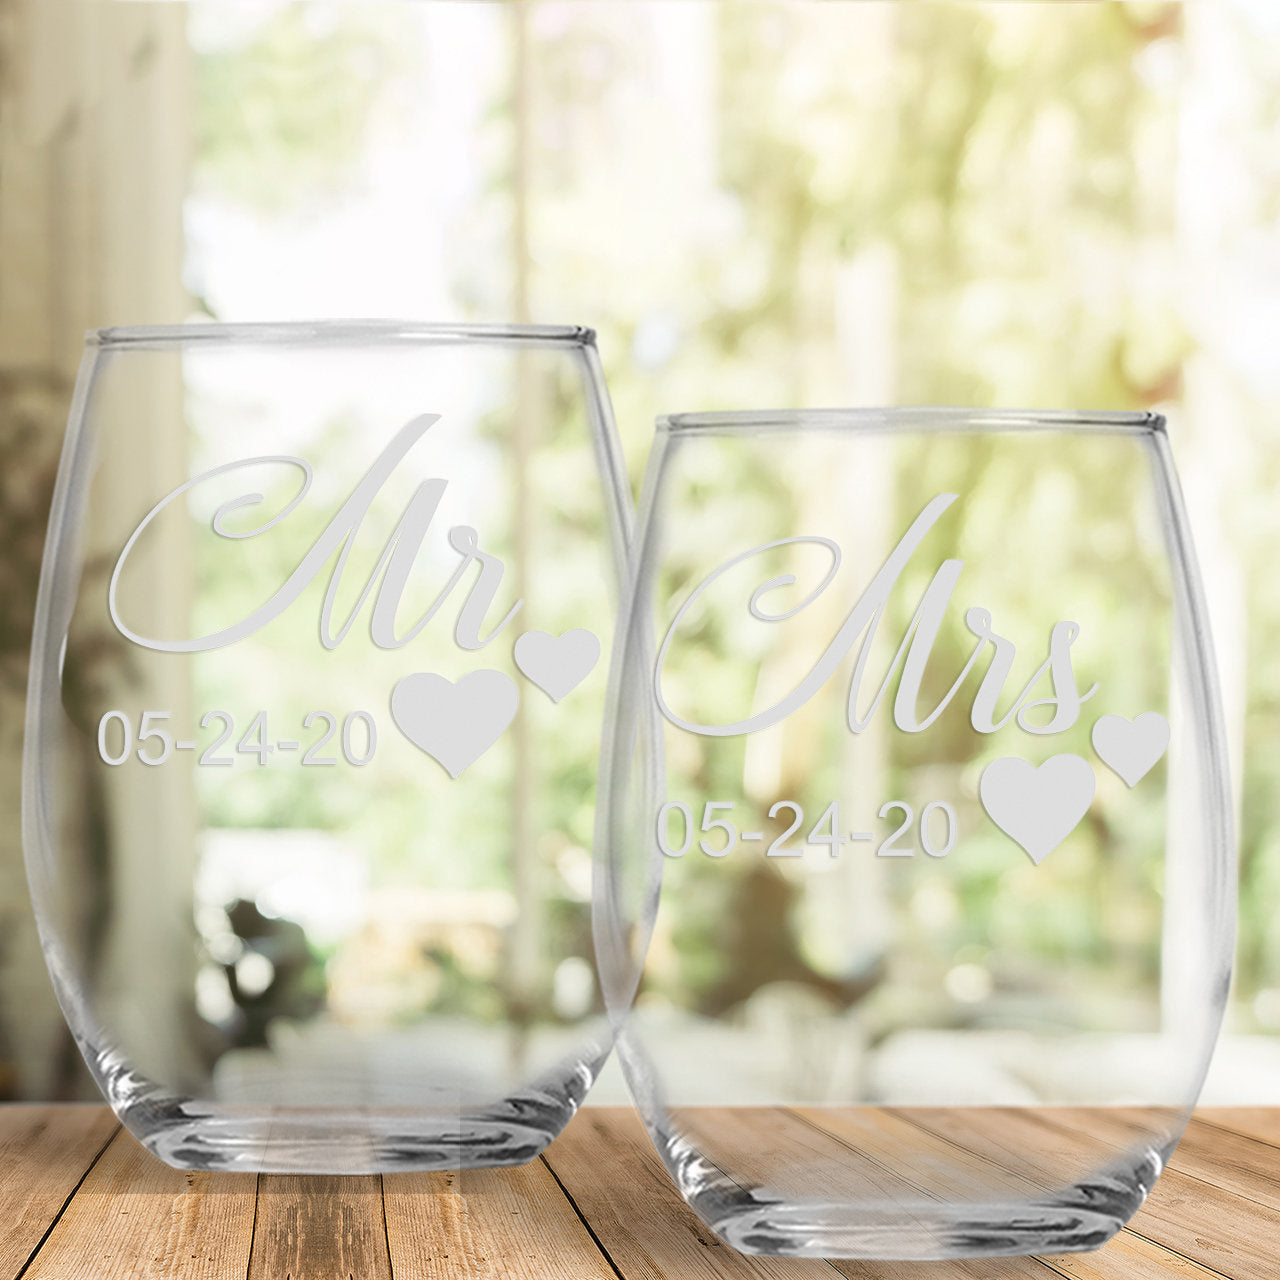 Personalized Stemless Wine glass set, Mr and Mrs, Wedding glasses, Wedding Wine glasses, Mr and Mrs Gift, Mr Mrs glasses, couples wedding gift